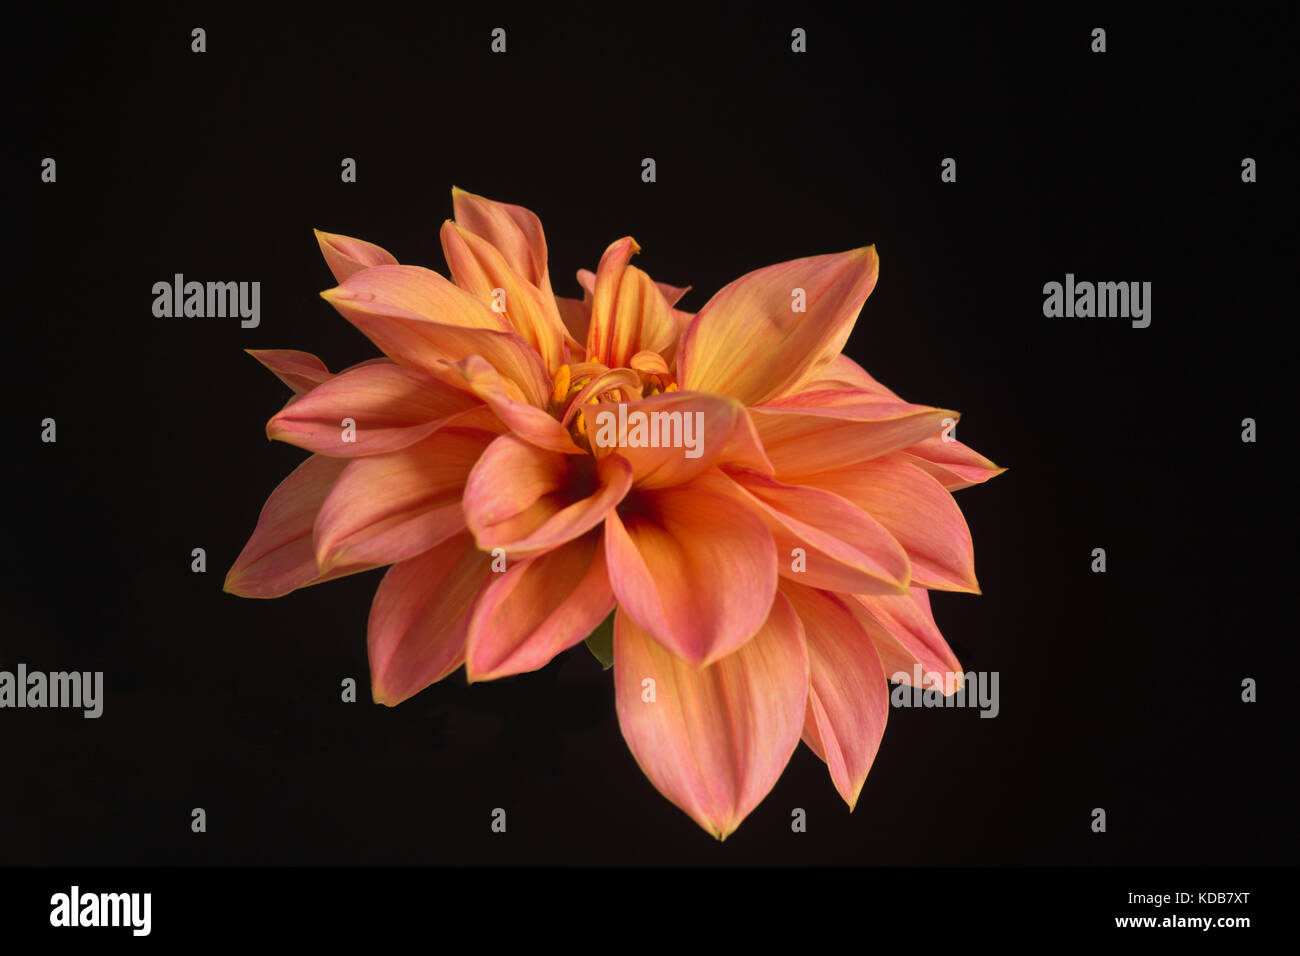 A single, double-flowered blossom of a beautiful dahlia isolated against a black background. Stock Photo